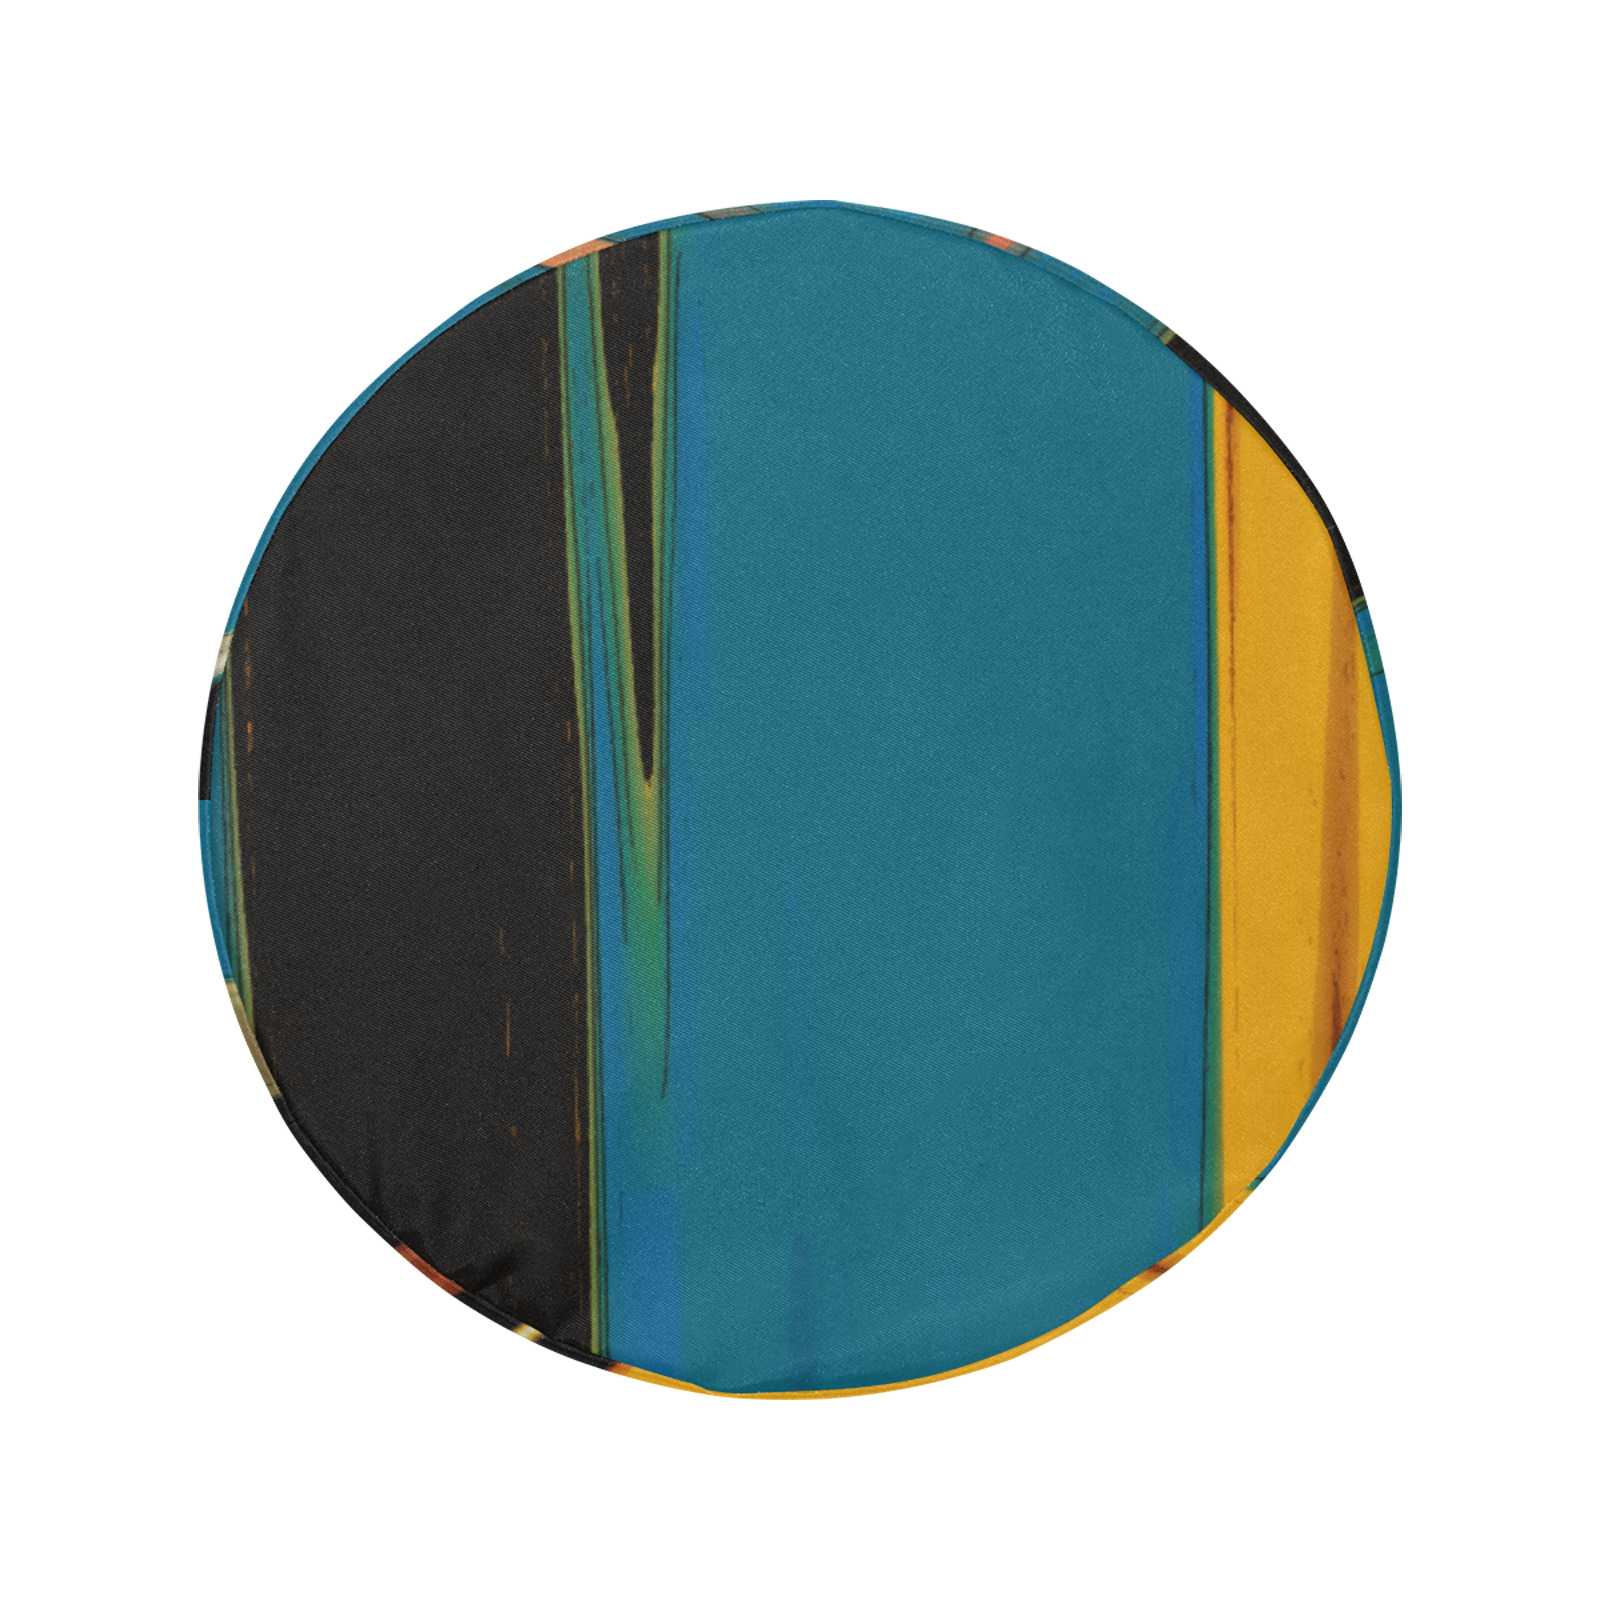 Black Turquoise And Orange Go! Abstract Art 34 Inch Spare Tire Cover